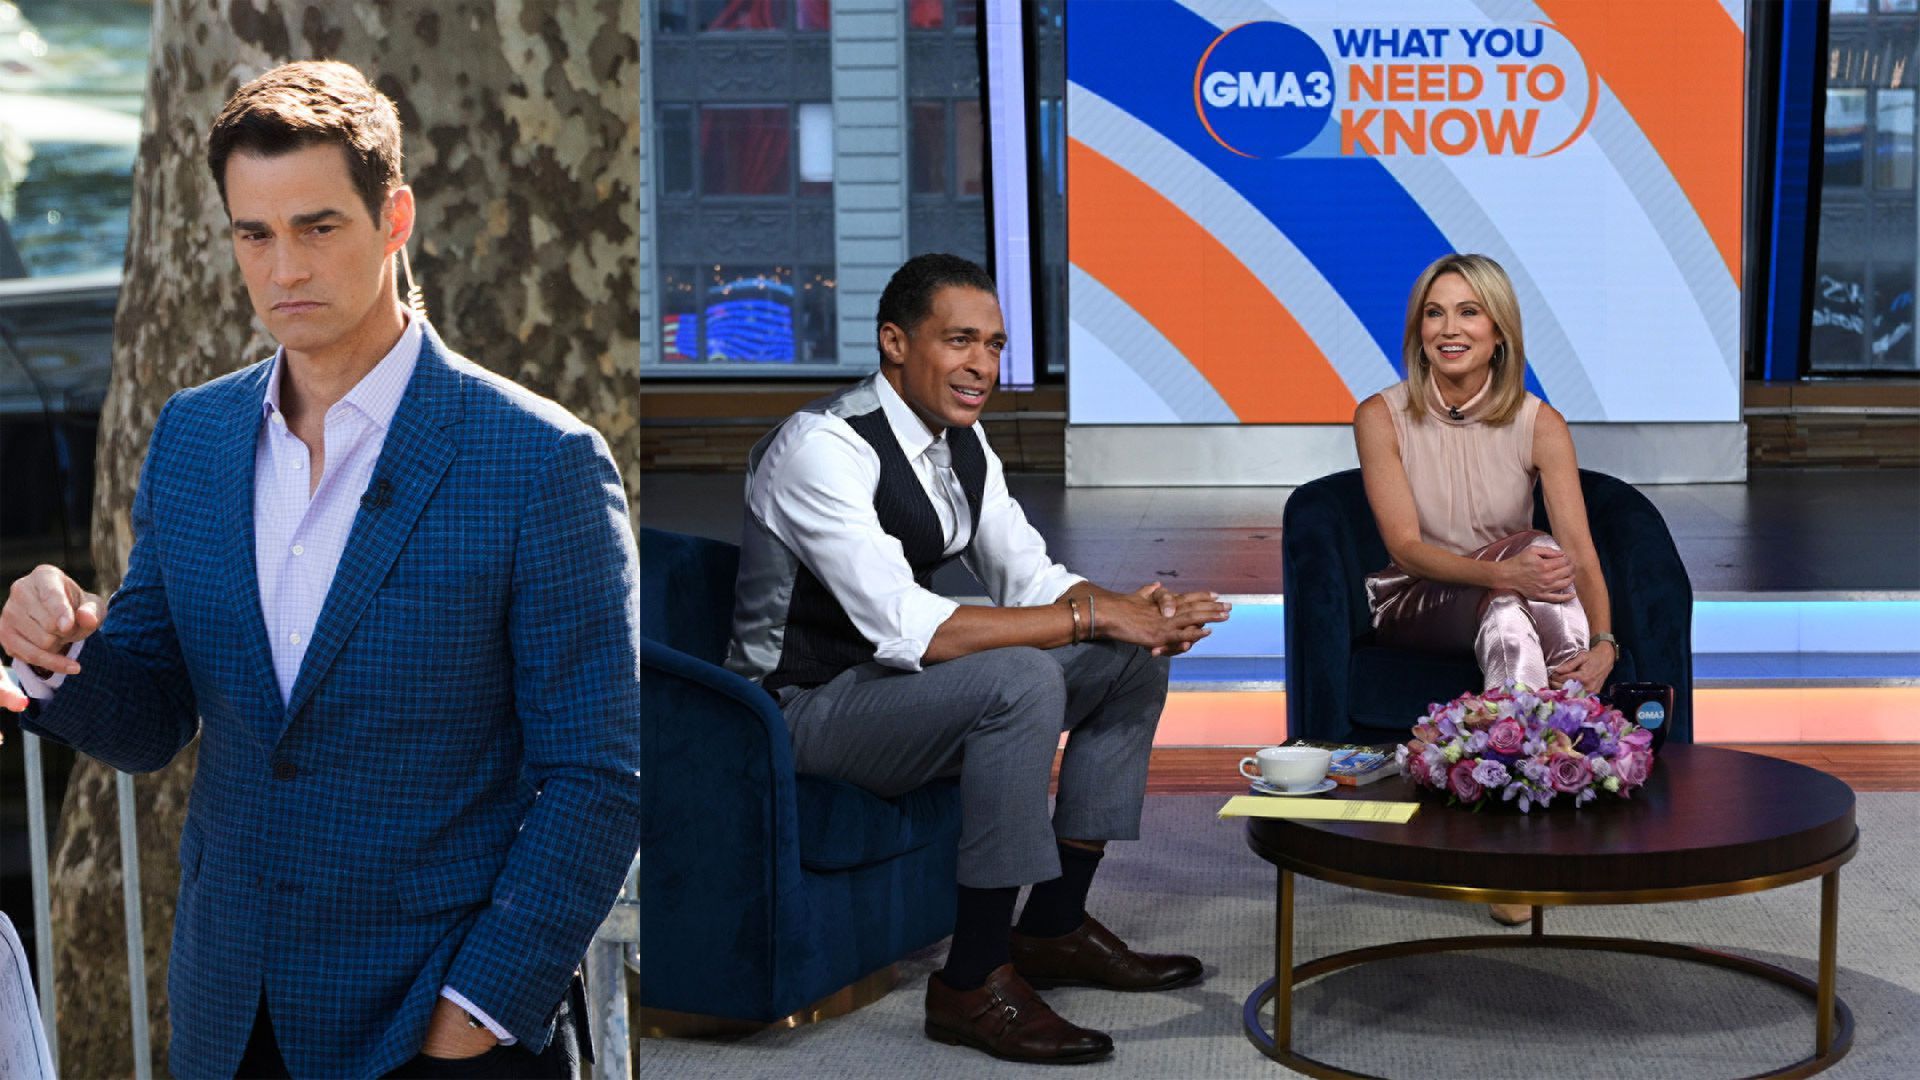 Amy Robach and T.J. Holmes weigh in on 'friend' Rob Marciano's sudden exit from Good Morning America